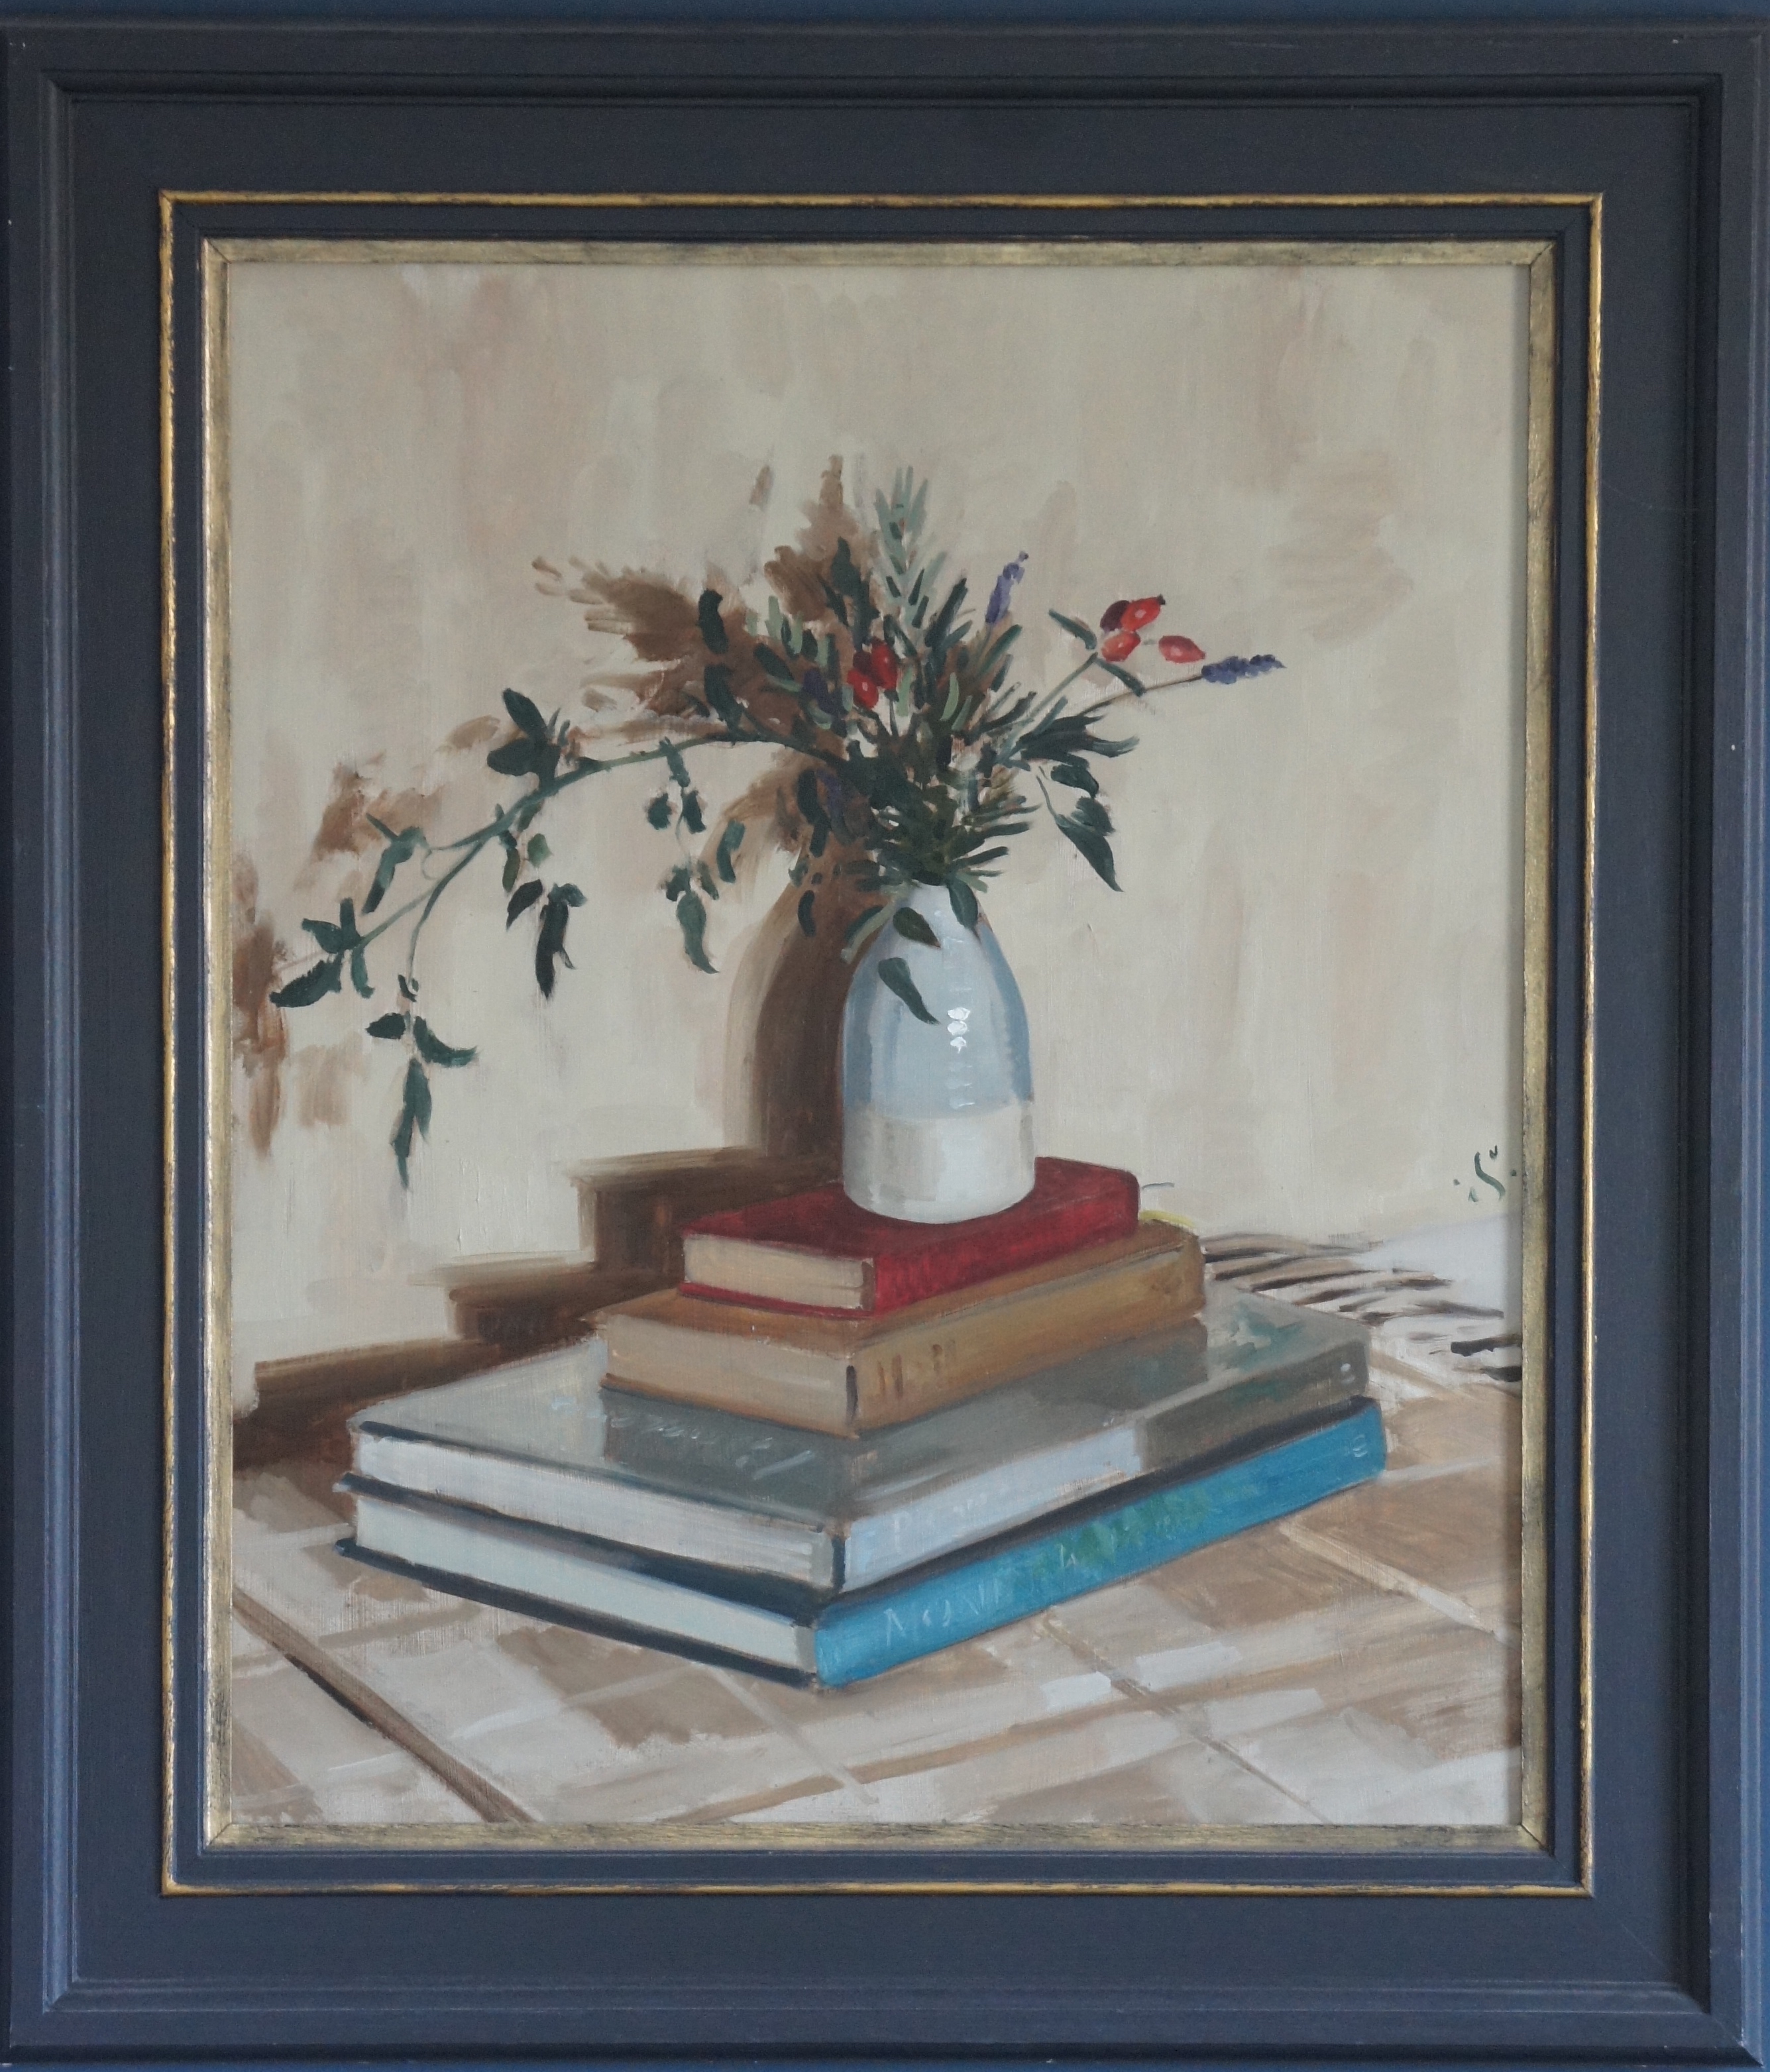 Sam Travers (b. 1984) Hedgerow plants and books Oil on board Signed with monogram 61 x 51 cm - Image 2 of 2